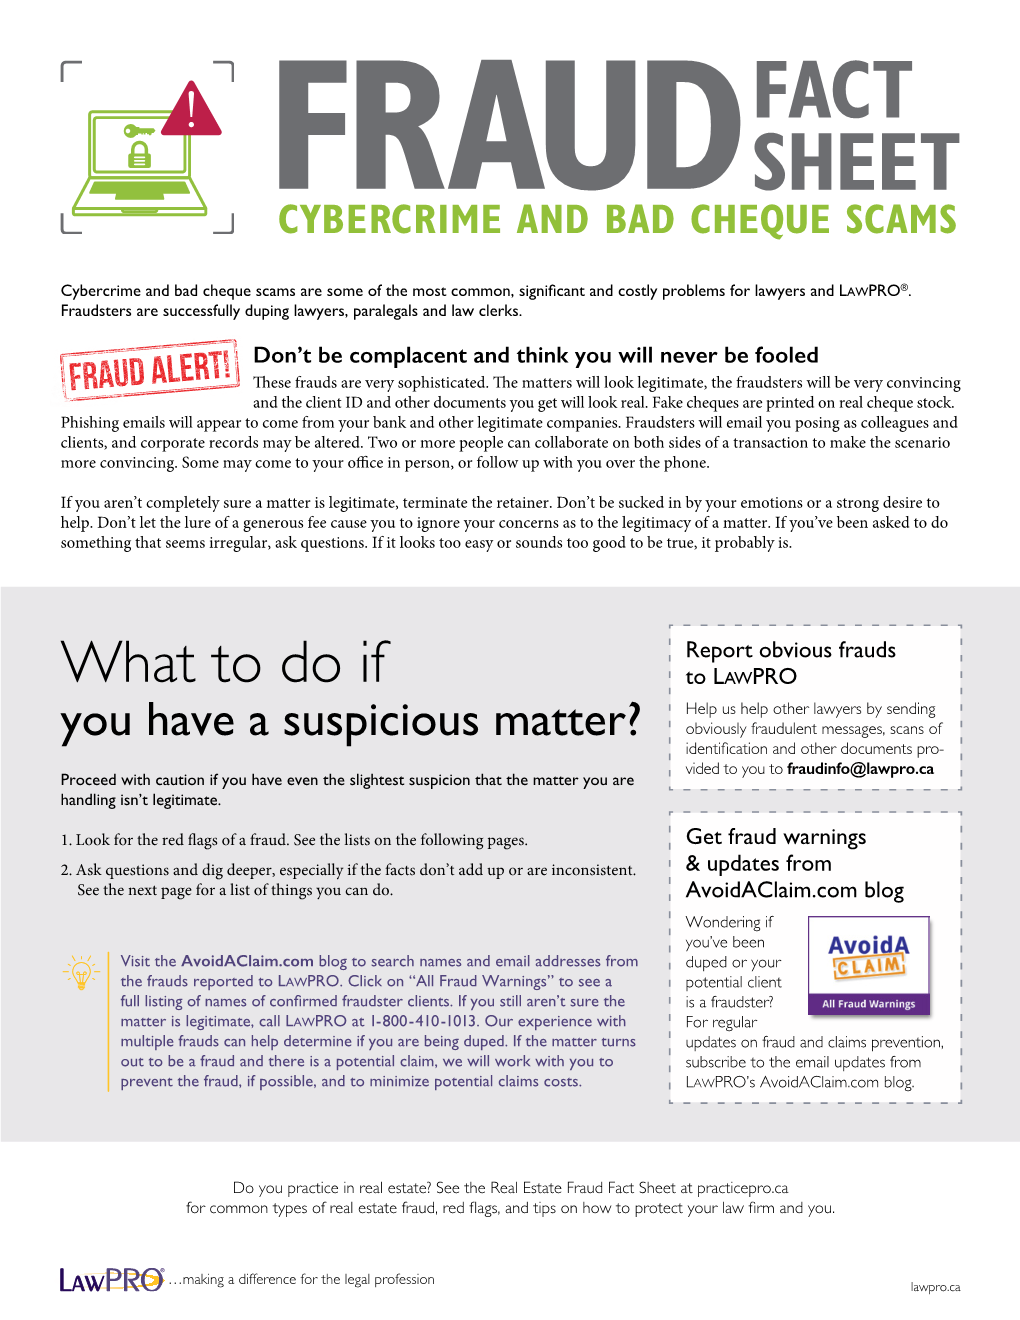 Cybercrime and Bad Cheque Scams Fraud Fact Sheet